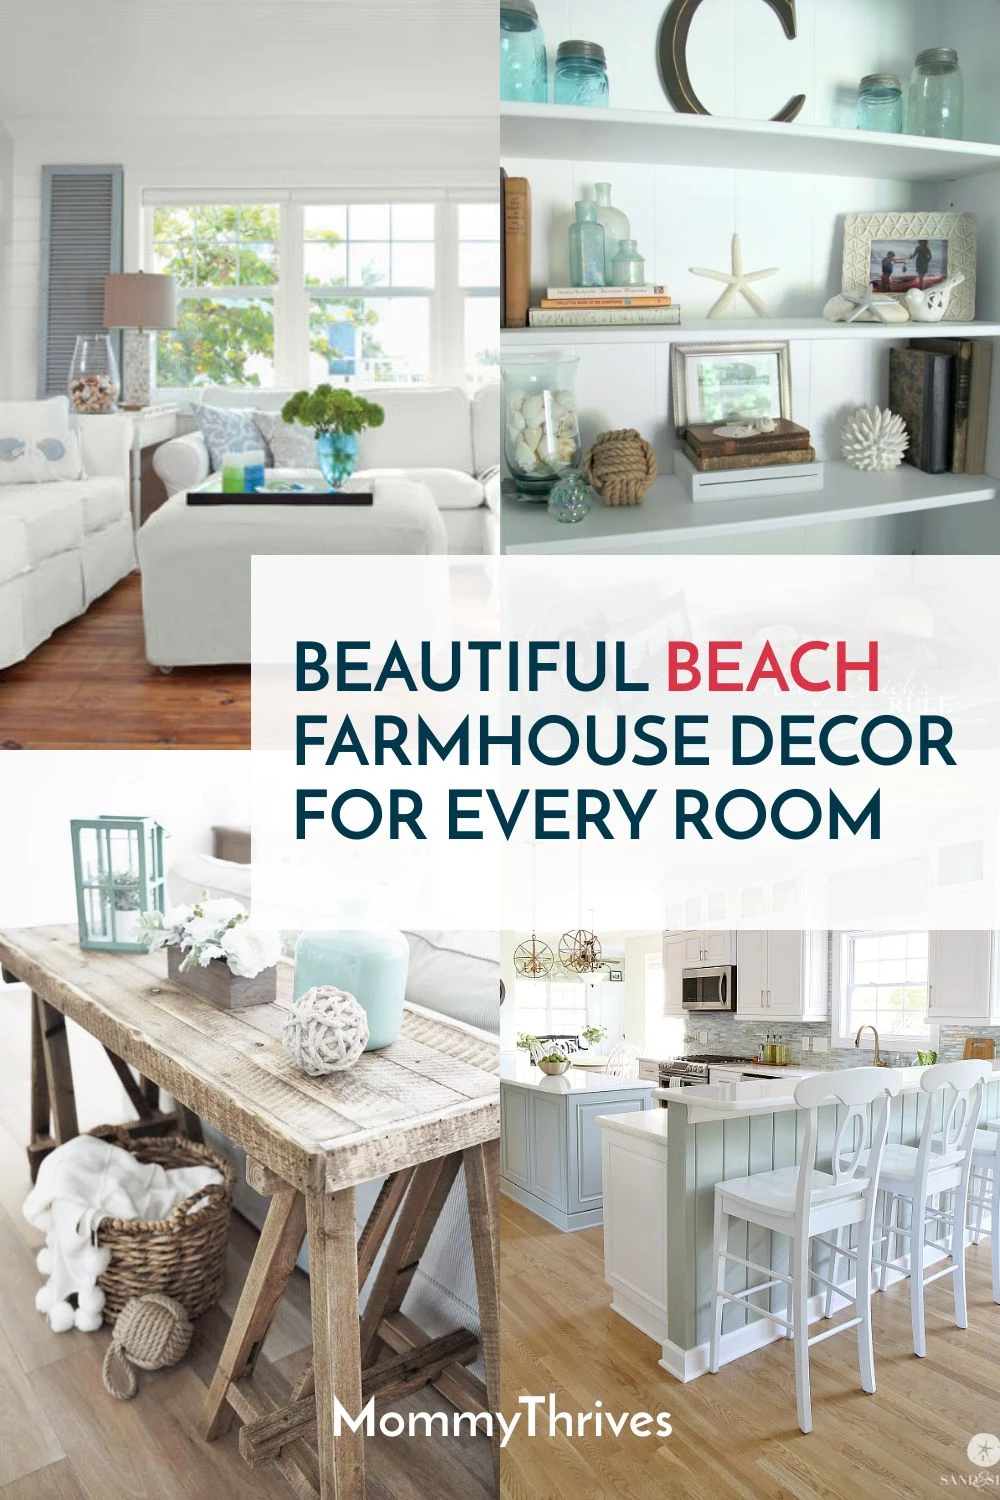 Beach Cottage Decor For Every Room In Your Home - MommyThrives